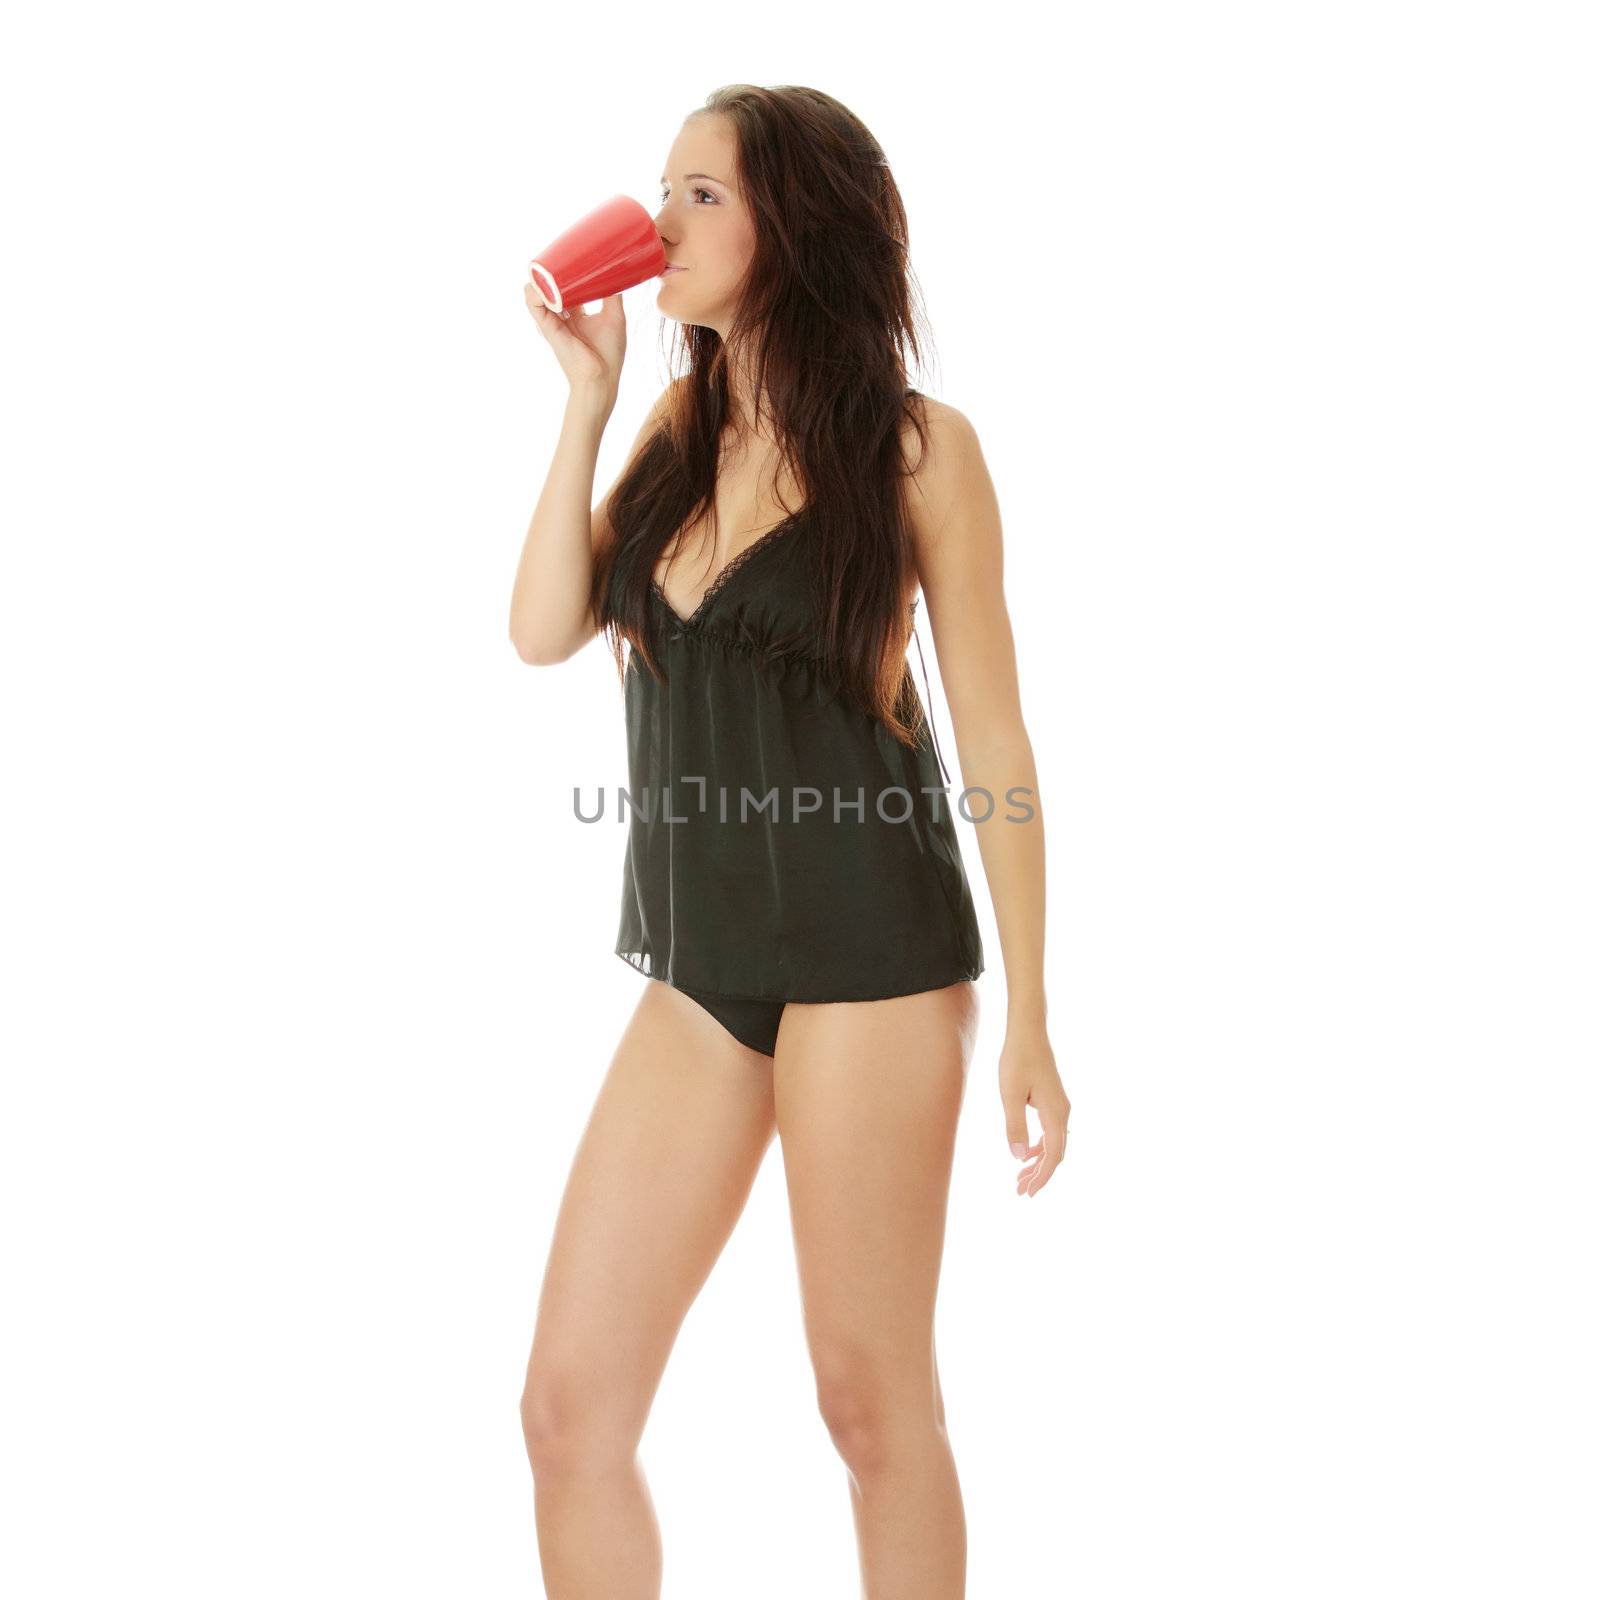 Morning woman in black lingerie with red mug isolated on white background